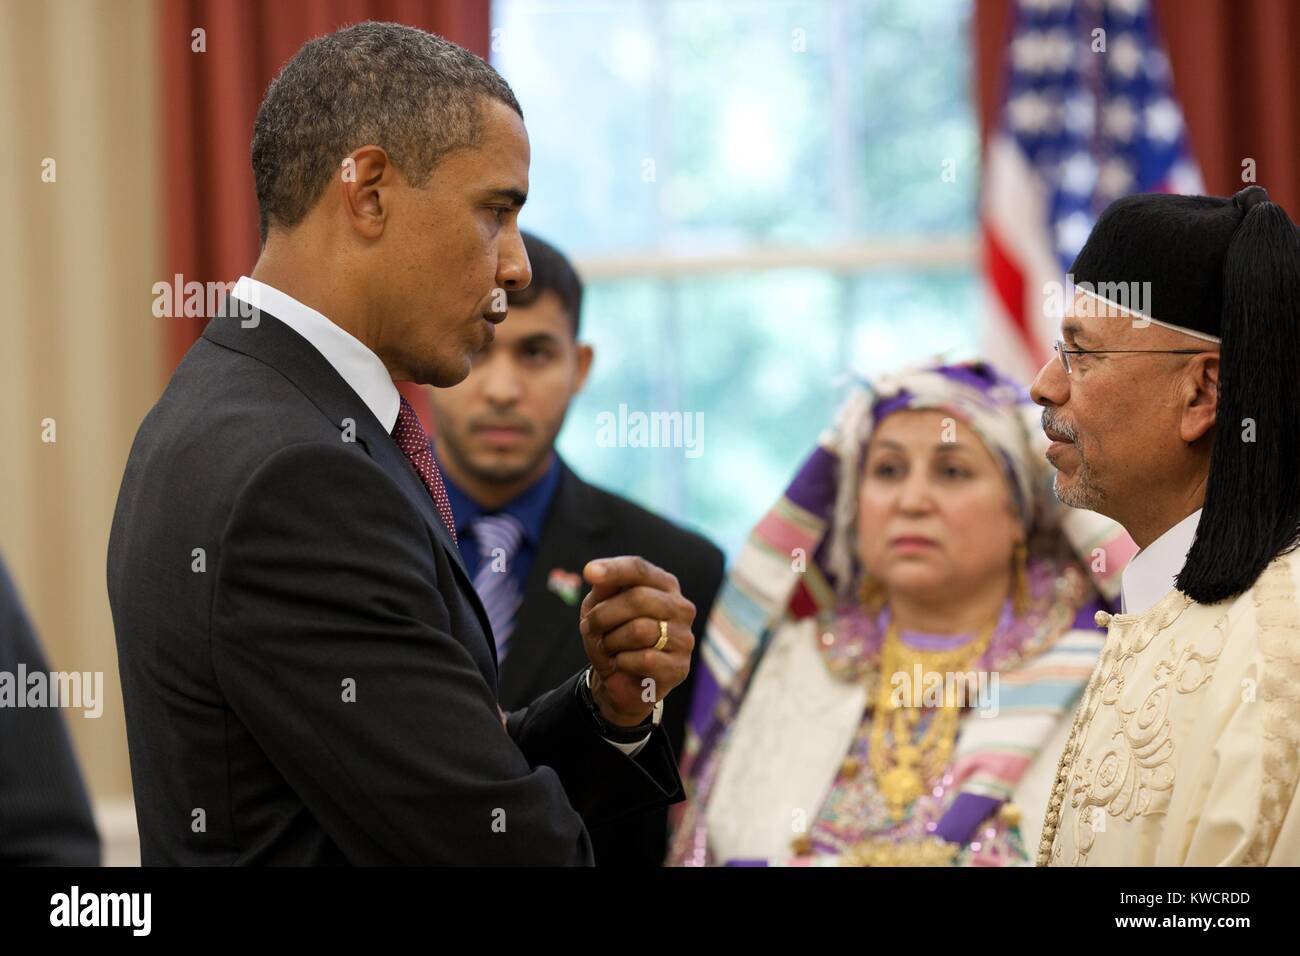 President Barack Obama talks with Libyan Ambassador Ali Suleiman Aujali and his family. At the Ambassador Credentialing Ceremony in the Oval Office, Sept. 9, 2011 (BSLOC 2015 3 187) Stock Photo